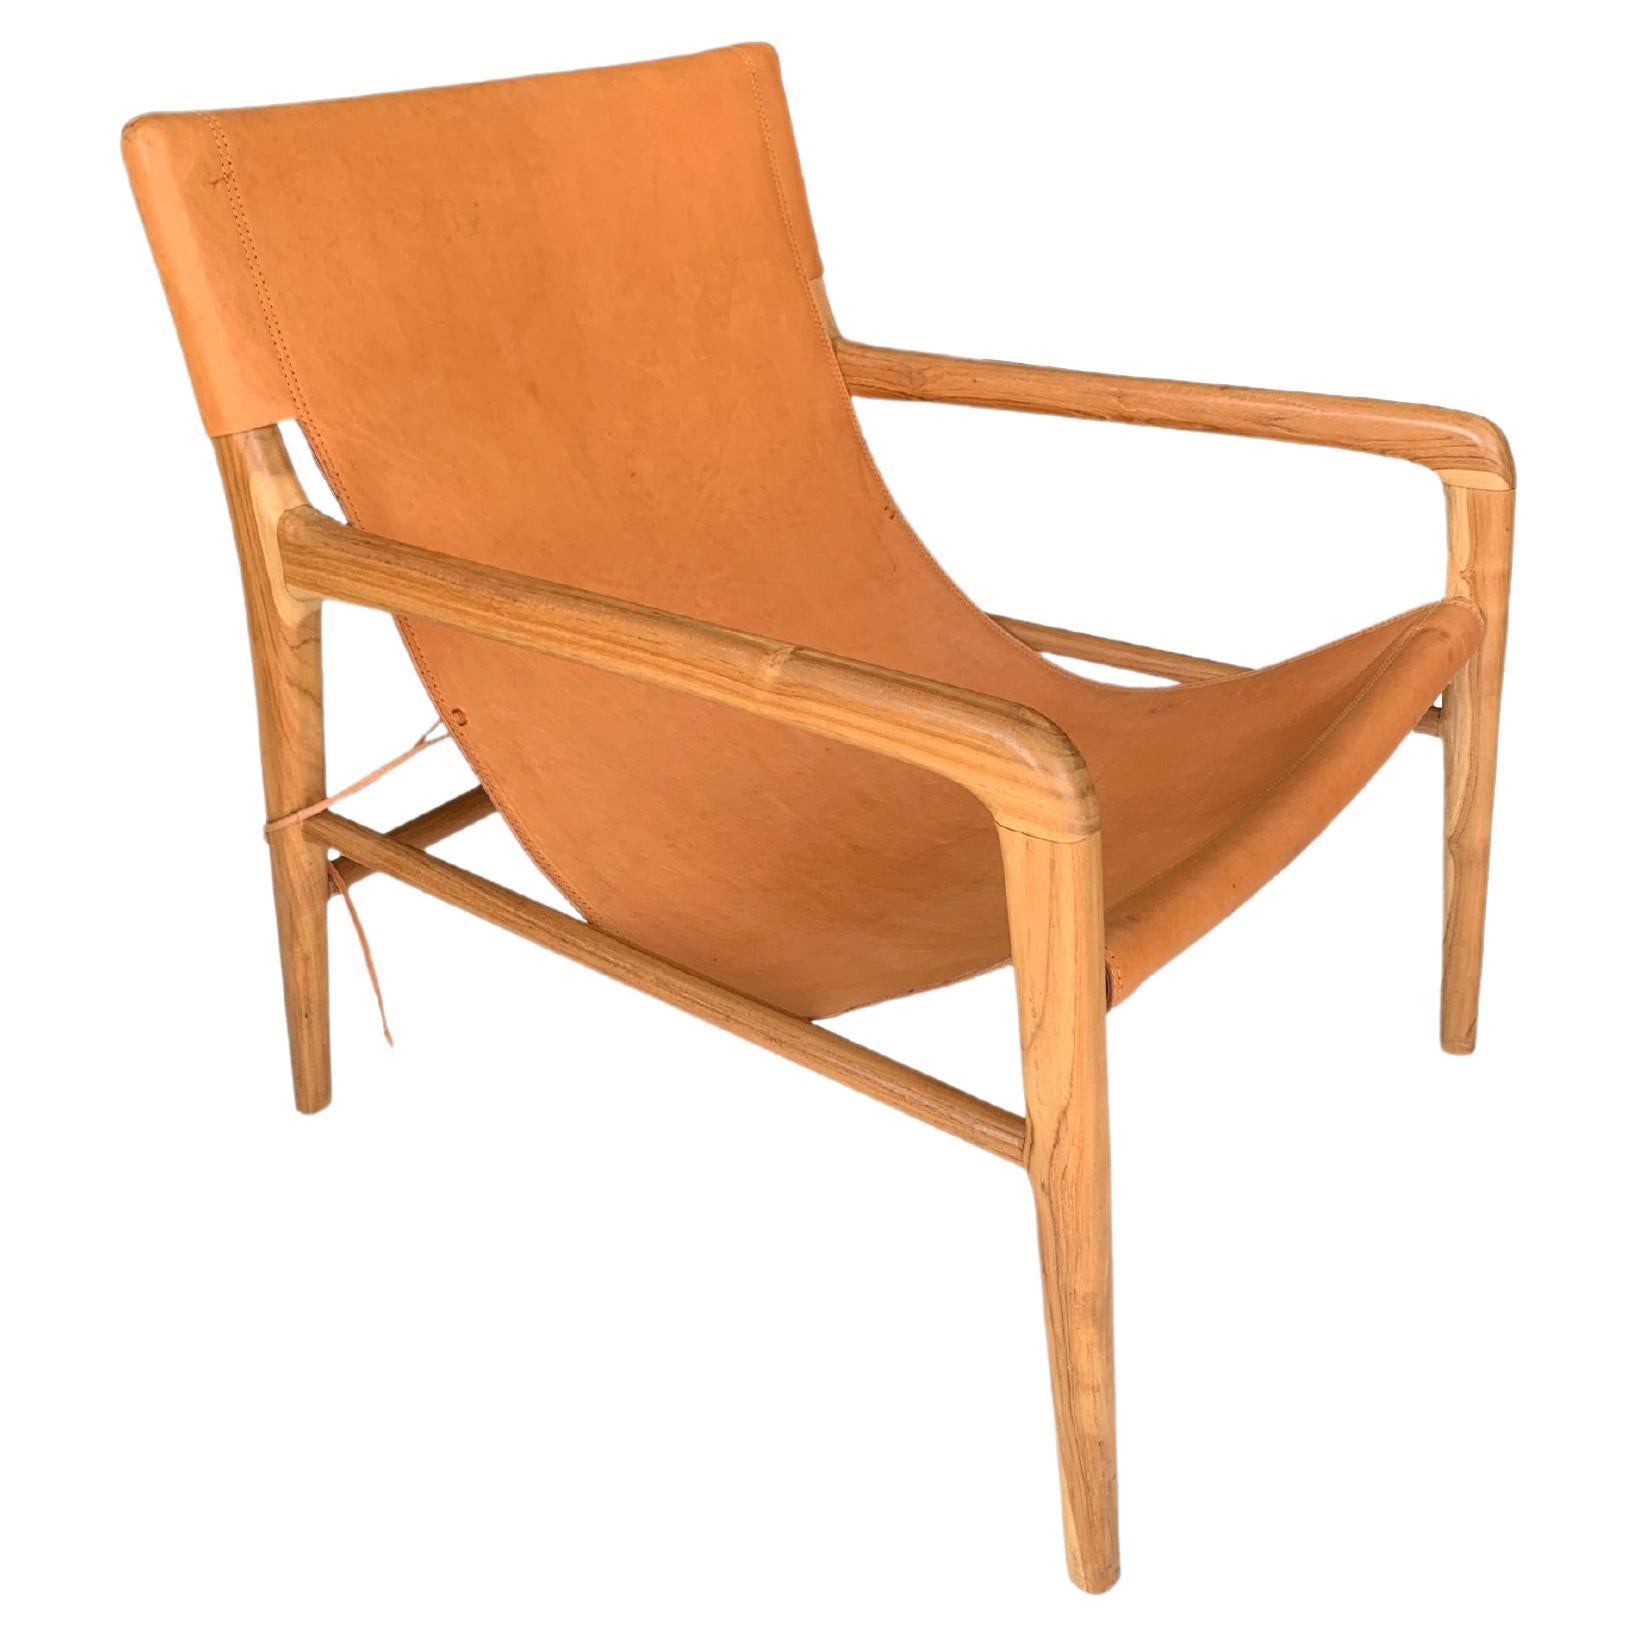 Teak Wood Framed Lounge Chair, with Hanging Leather Seat, Light Tone